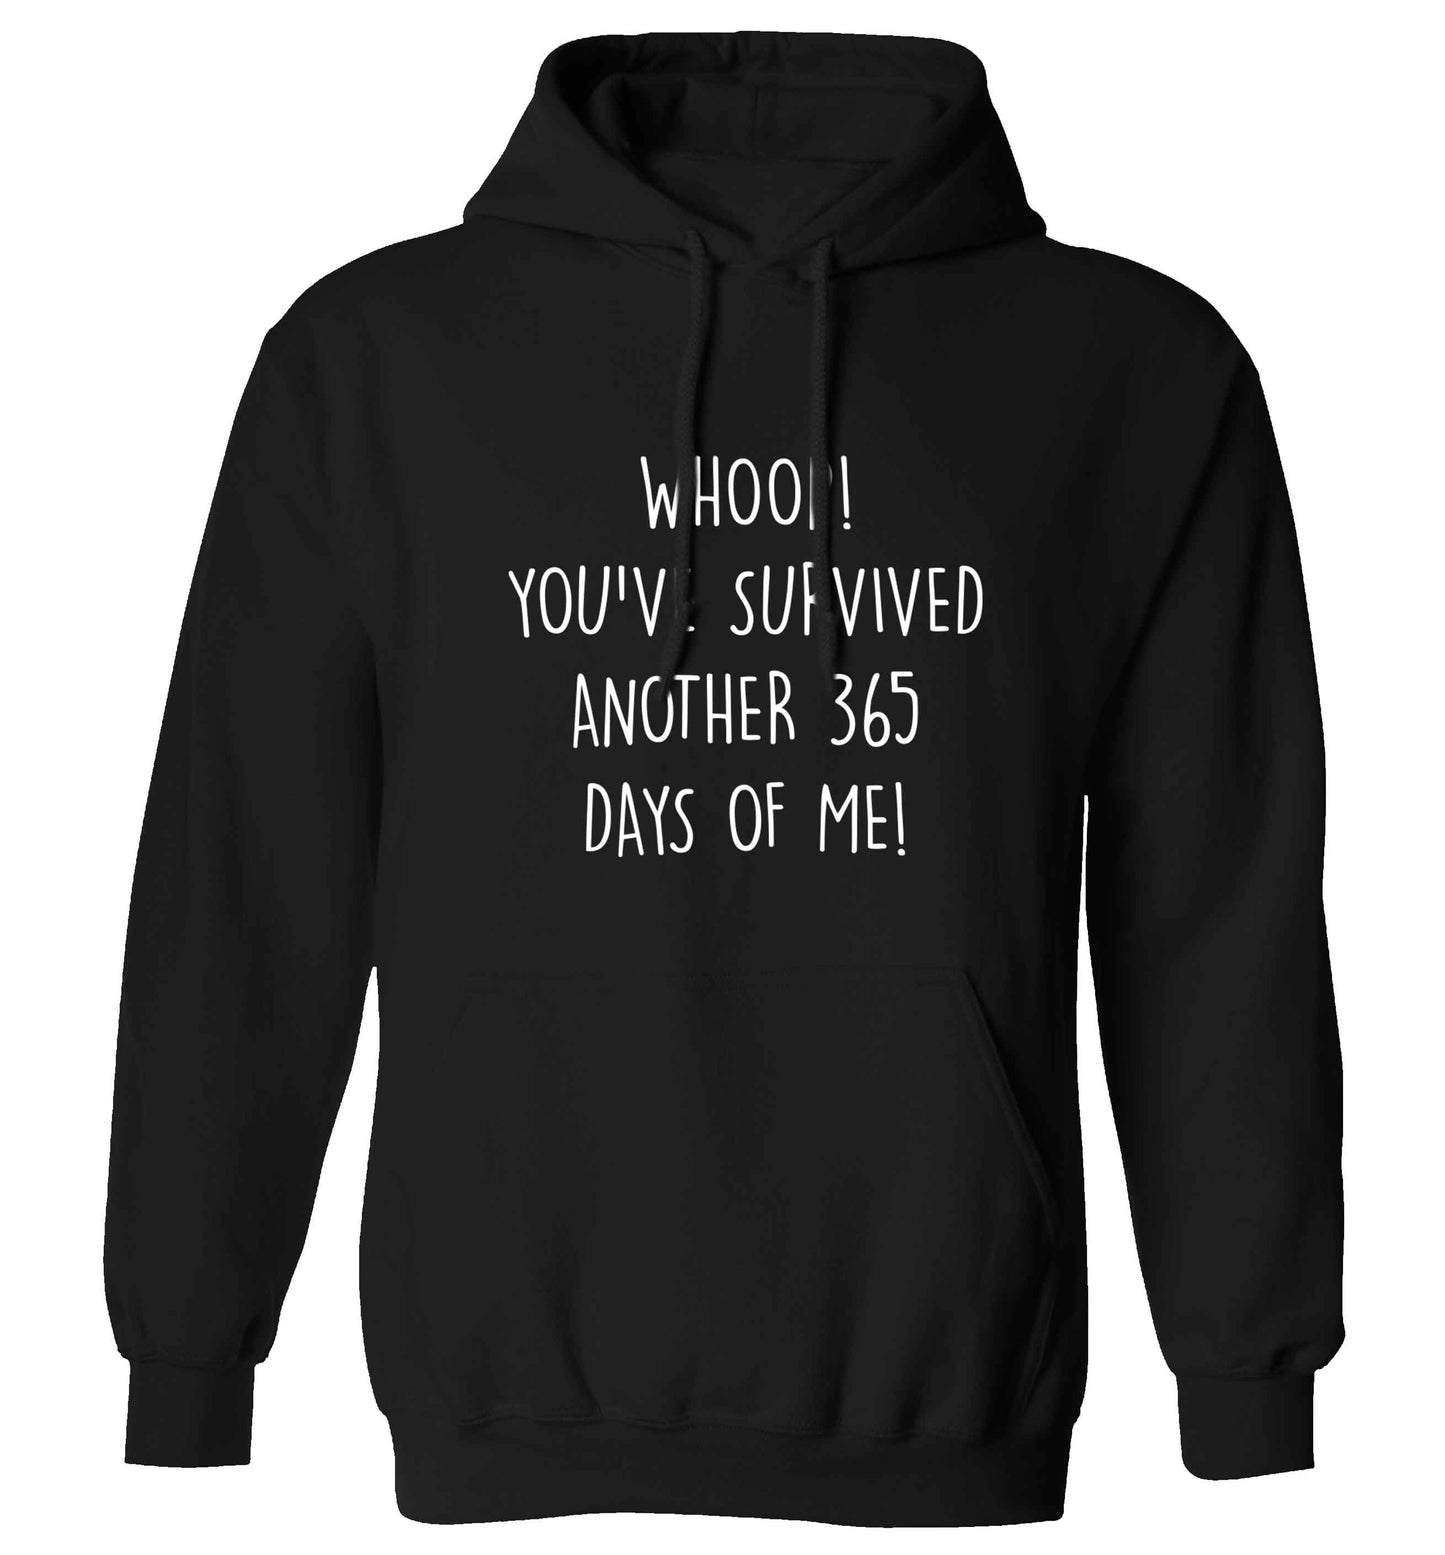 Whoop! You've survived another 365 days with me! adults unisex black hoodie 2XL